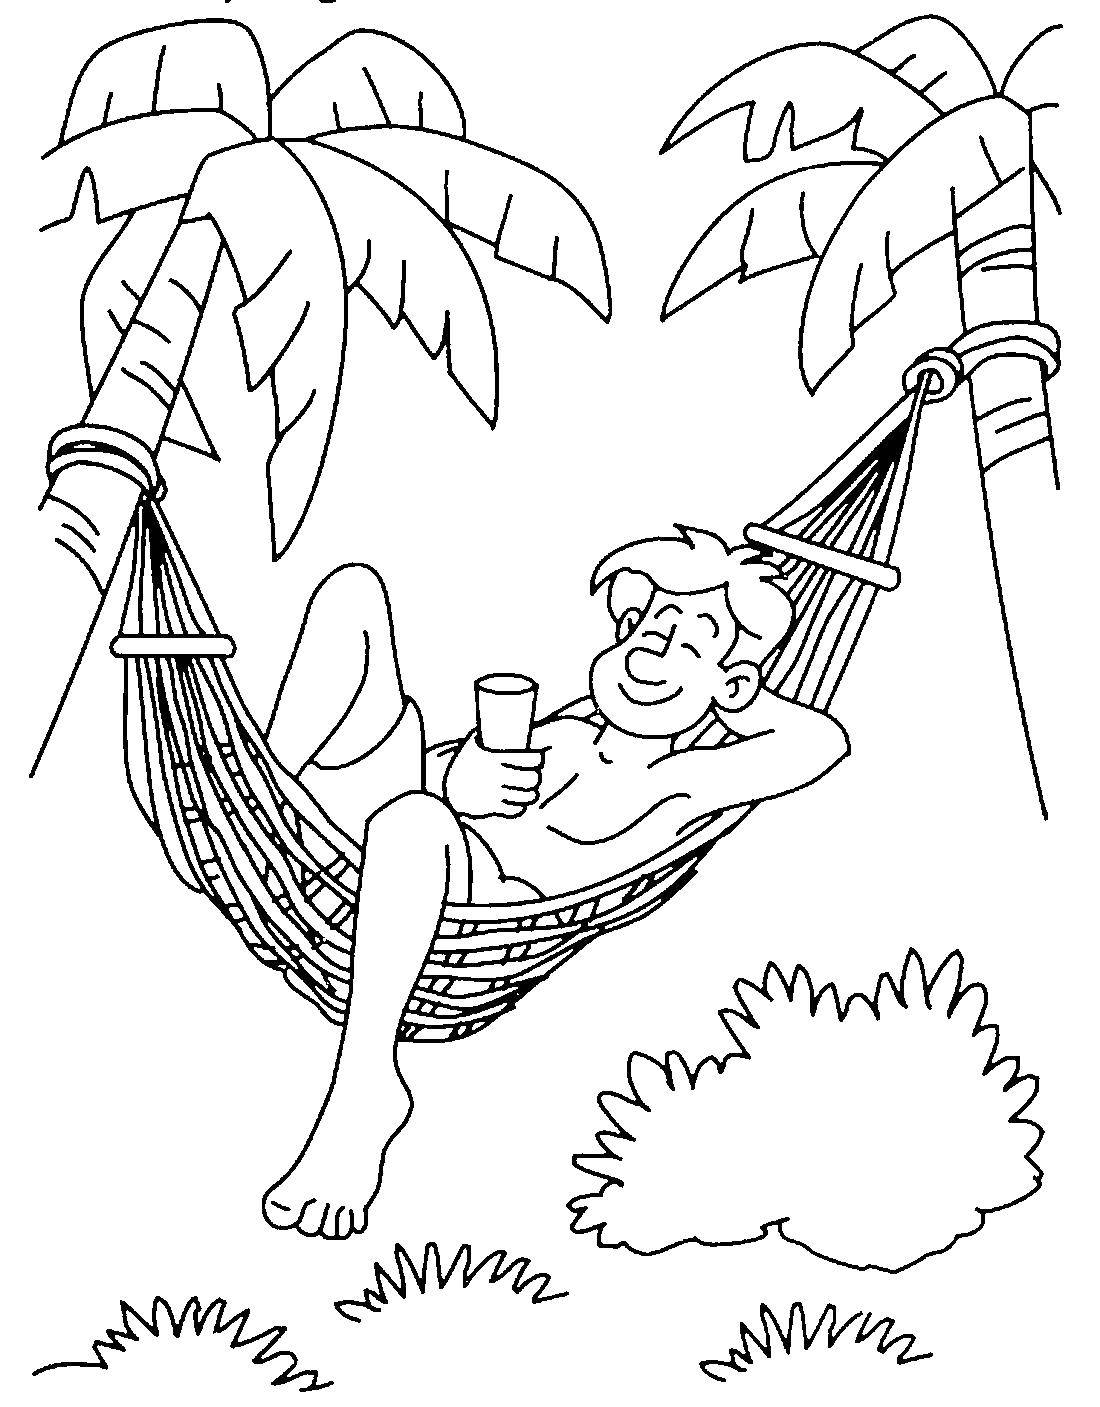 Coloring Relax on the hammock amongst the palm trees. Category the rest. Tags:  Rest, hammock, palm trees.